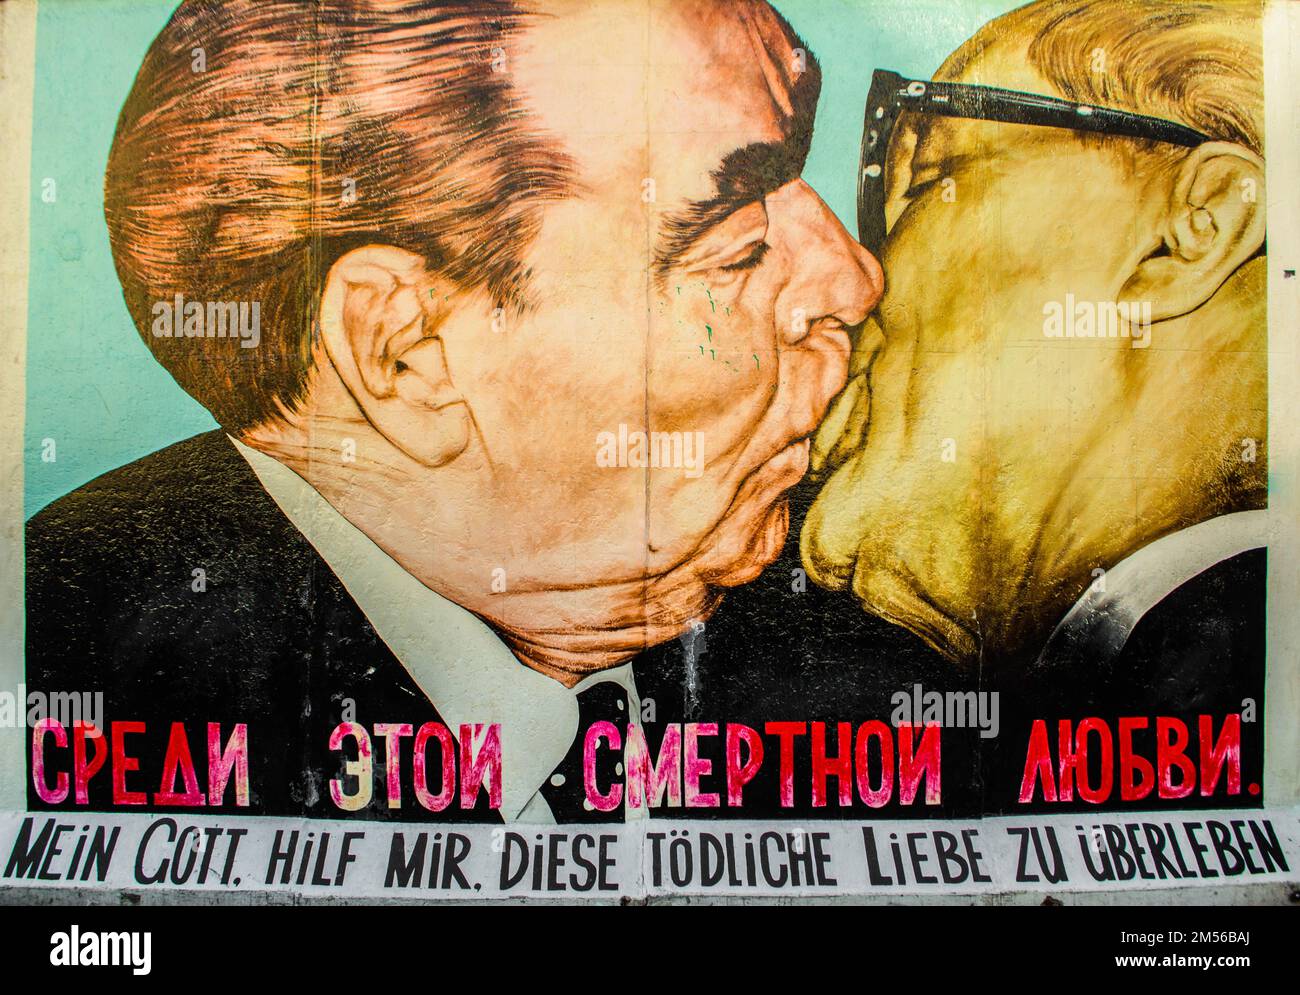 Fraternal kiss between Brezhnev and Honecker in East Side Gallery, Berlin  Stock Photo - Alamy